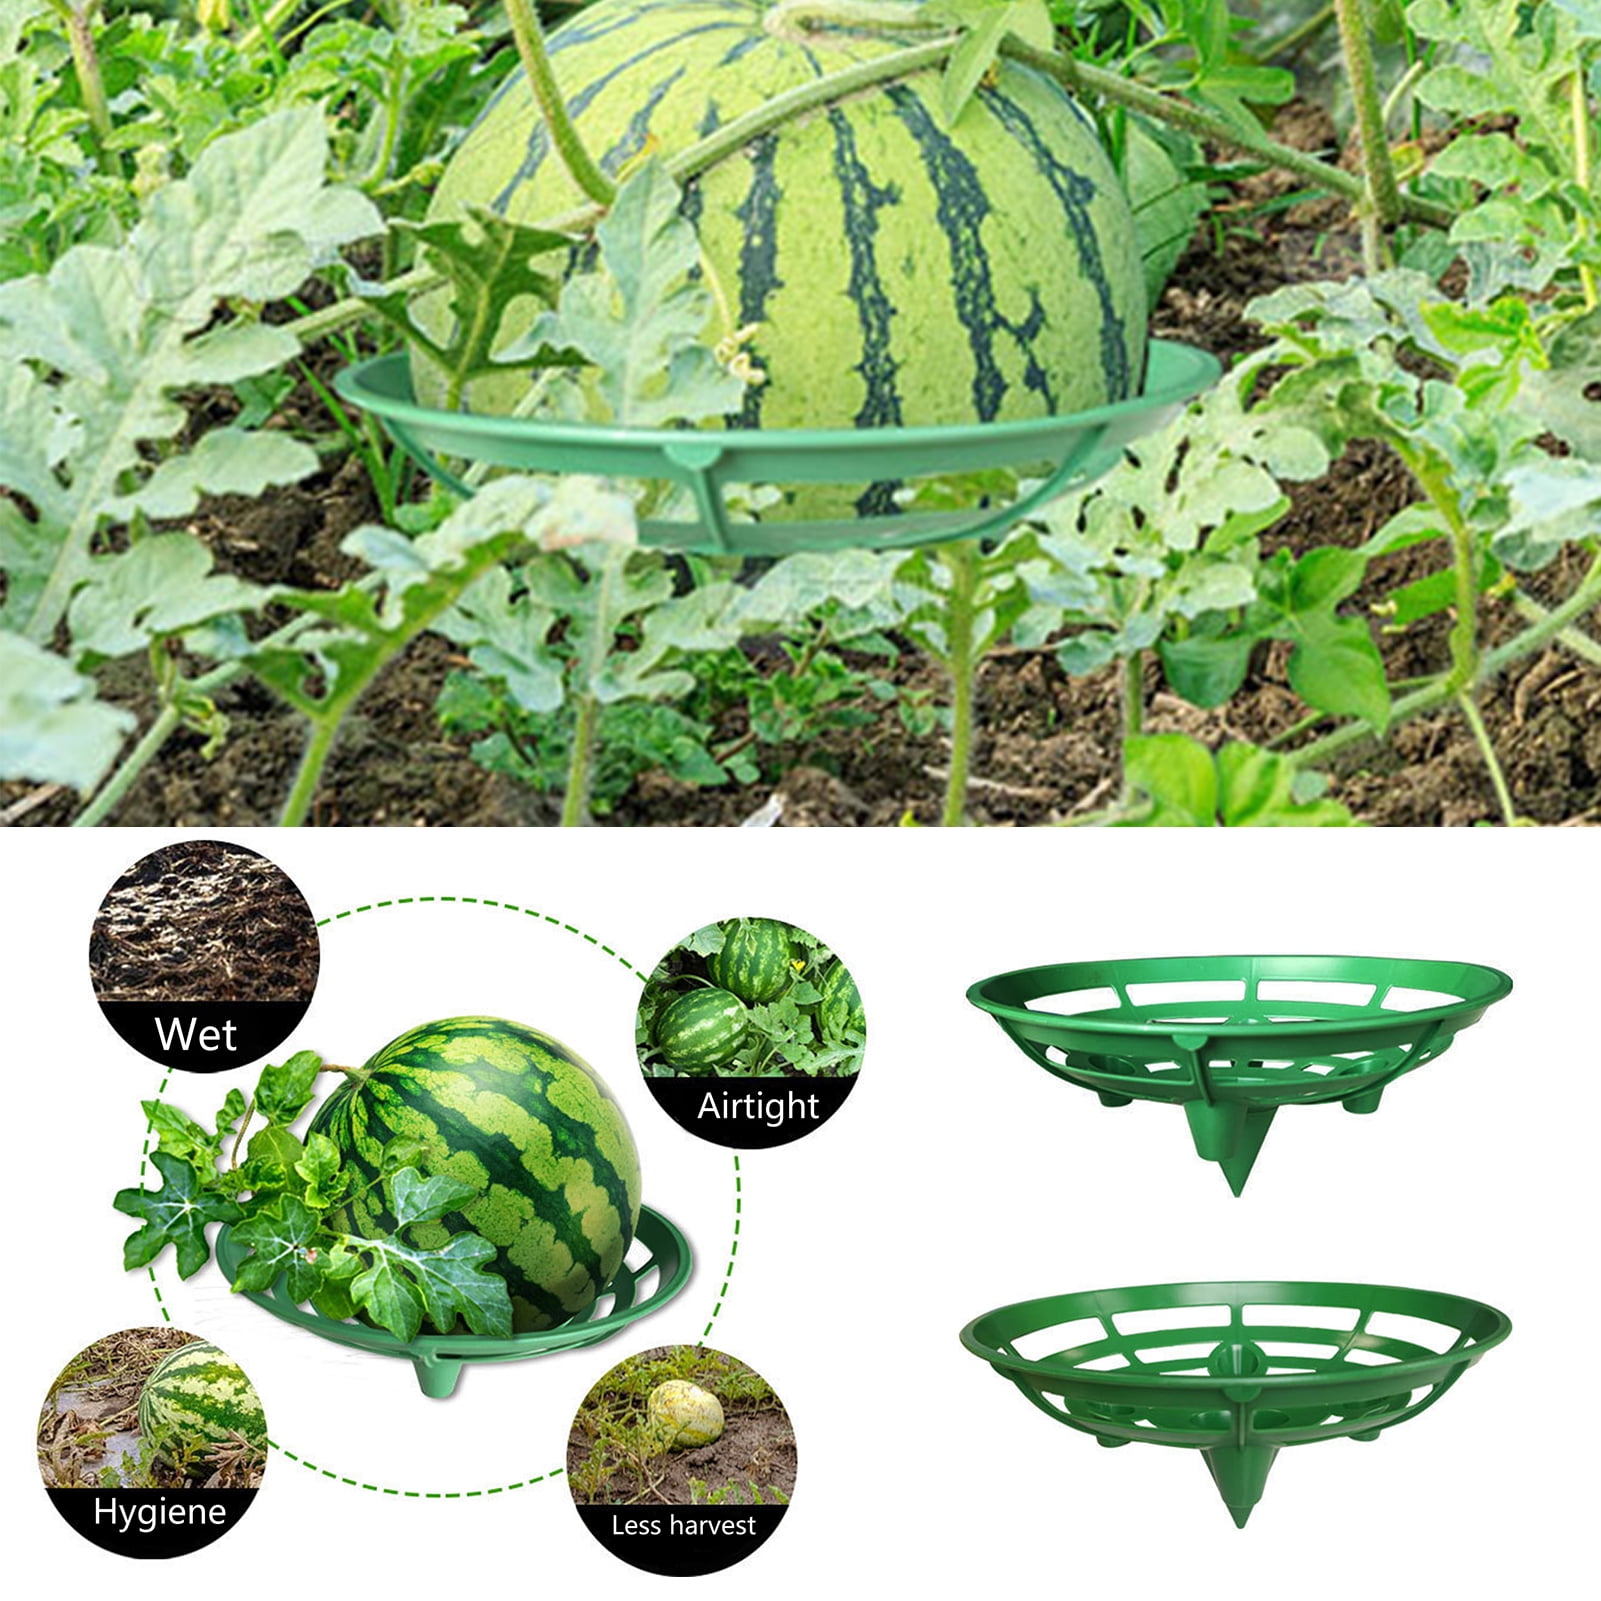 Hesroicy Set of 2 Watermelon Holders with Heightened Plant Frames - Increase Yield for Pumpkin, Cantaloupe, Squash, and Plants - Essential Garden Tools - Walmart.com